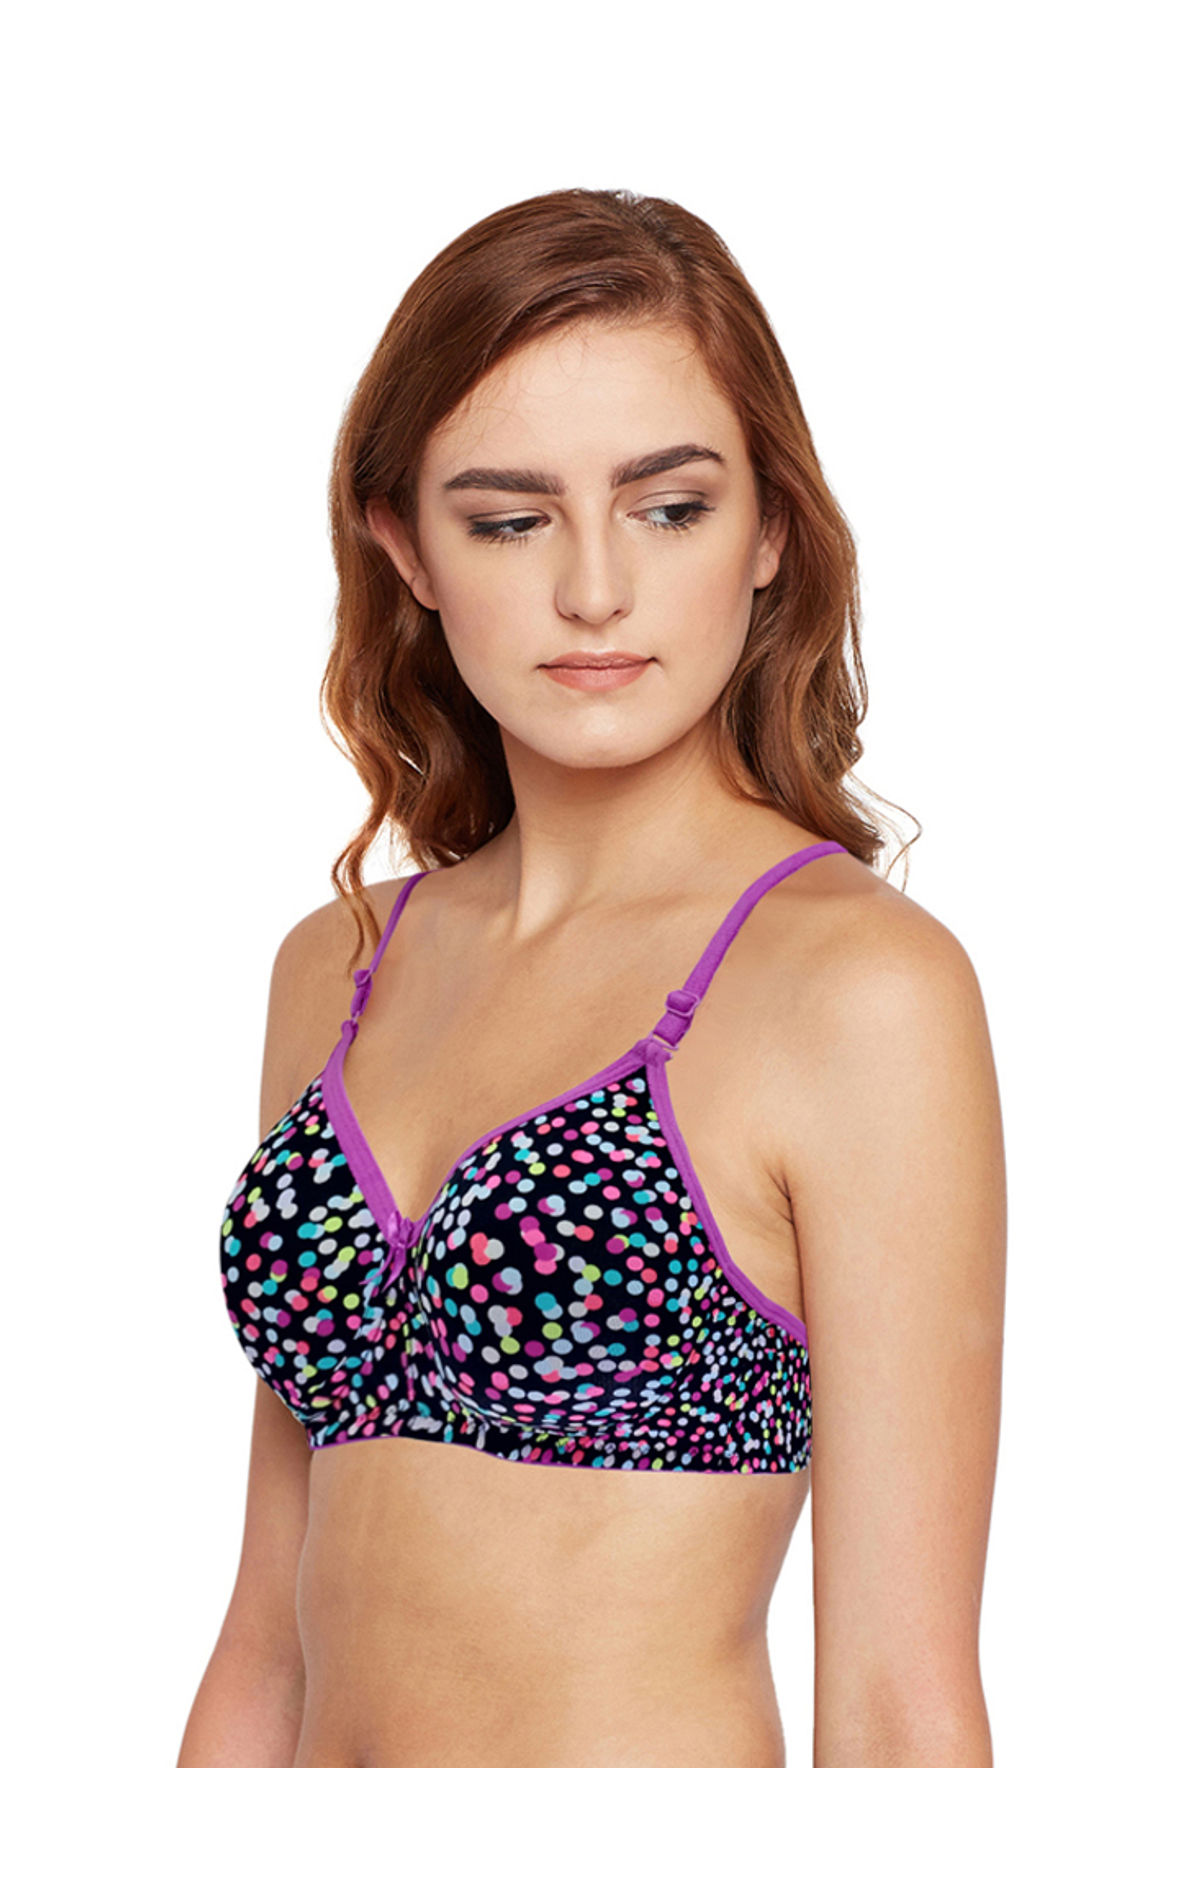 BODYCARE 6701A Women'S Seamless Cotton Printed Padded Bra (Pink) in  Udaipur-Rajasthan at best price by Bhagwati Bhandar - Justdial